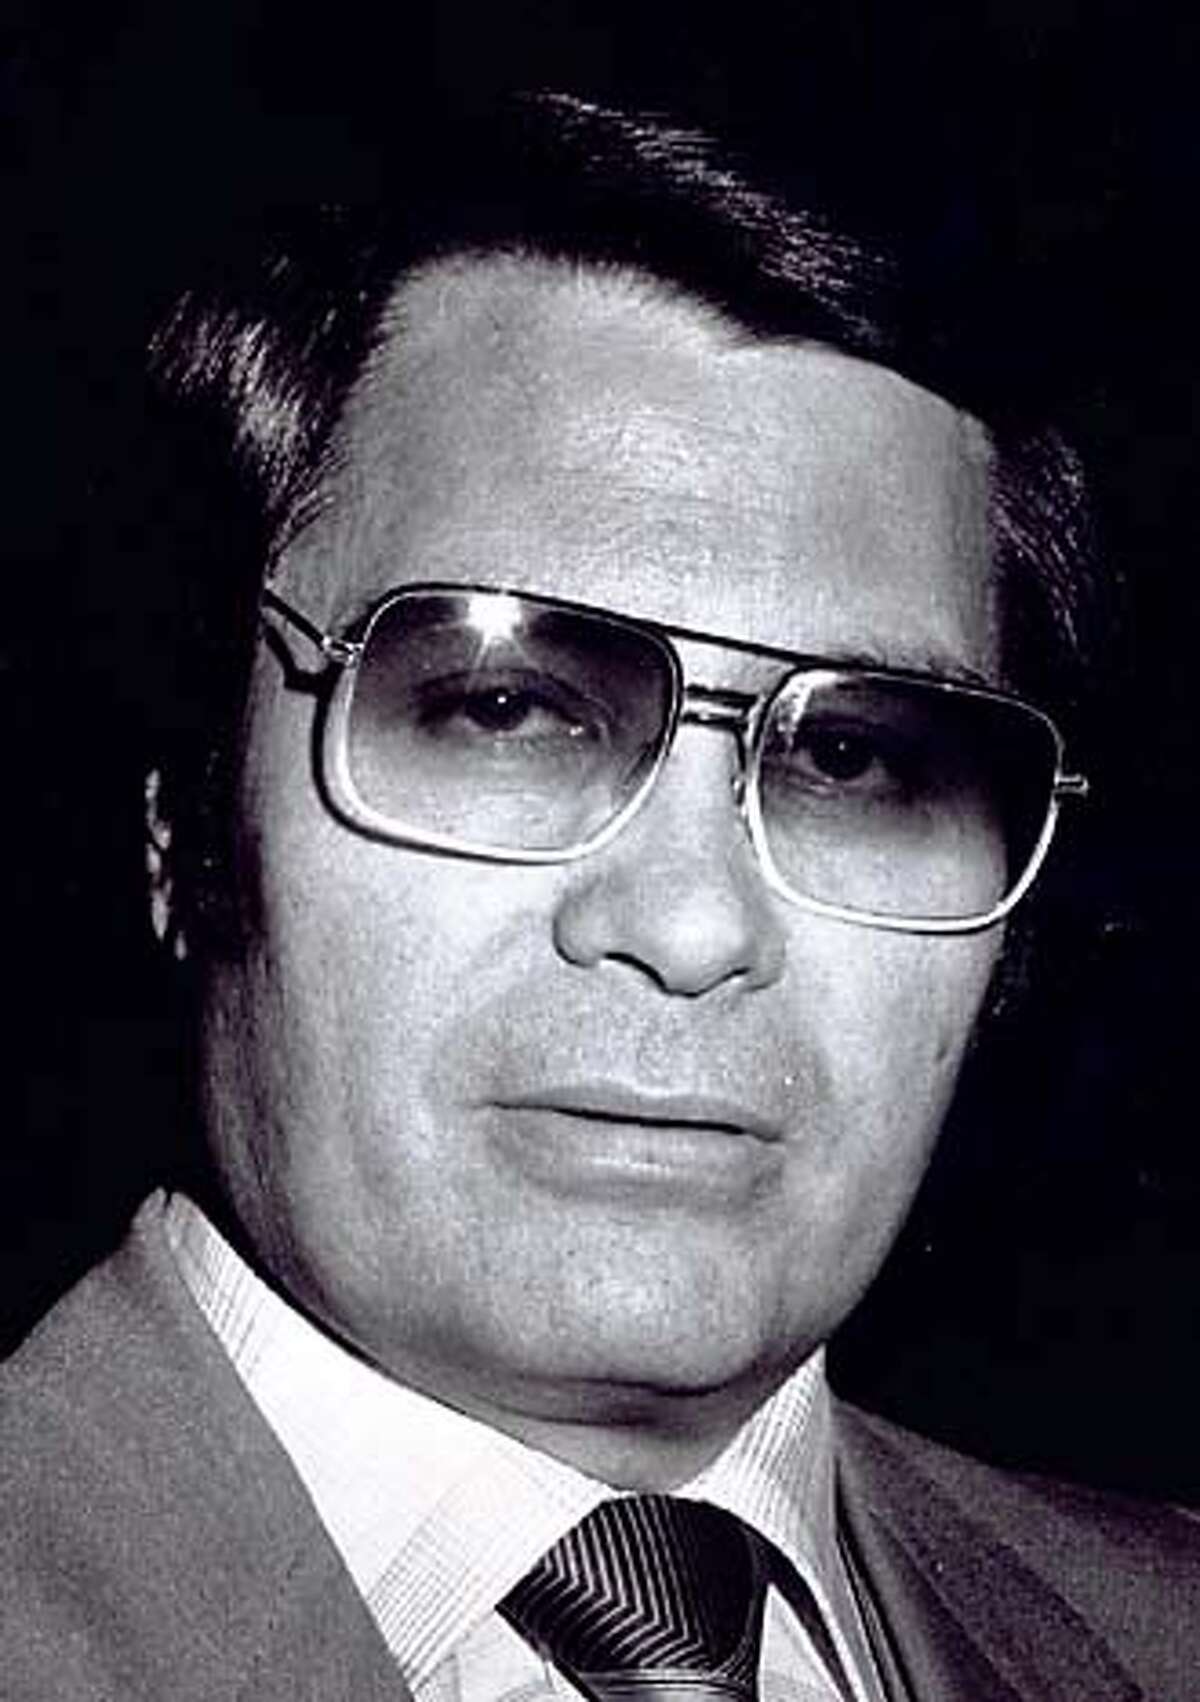 A look back at Jonestown The Rev. Jim Jones is infamous for leading hundreds to their deaths in Jonestown. Before that horrific event, however, Jones was known as a charismatic preacher who dazzled followers of the Peoples Temple with promises of racial equality and a socialist utopia. He rose to prominence in San Francisco, becoming a politically powerful figure. But lawsuits and investigations by the press would prompt the fateful move by Jones and his Bay Area flock to the jungles of Guyana. (Warning: Some photos are graphic.)